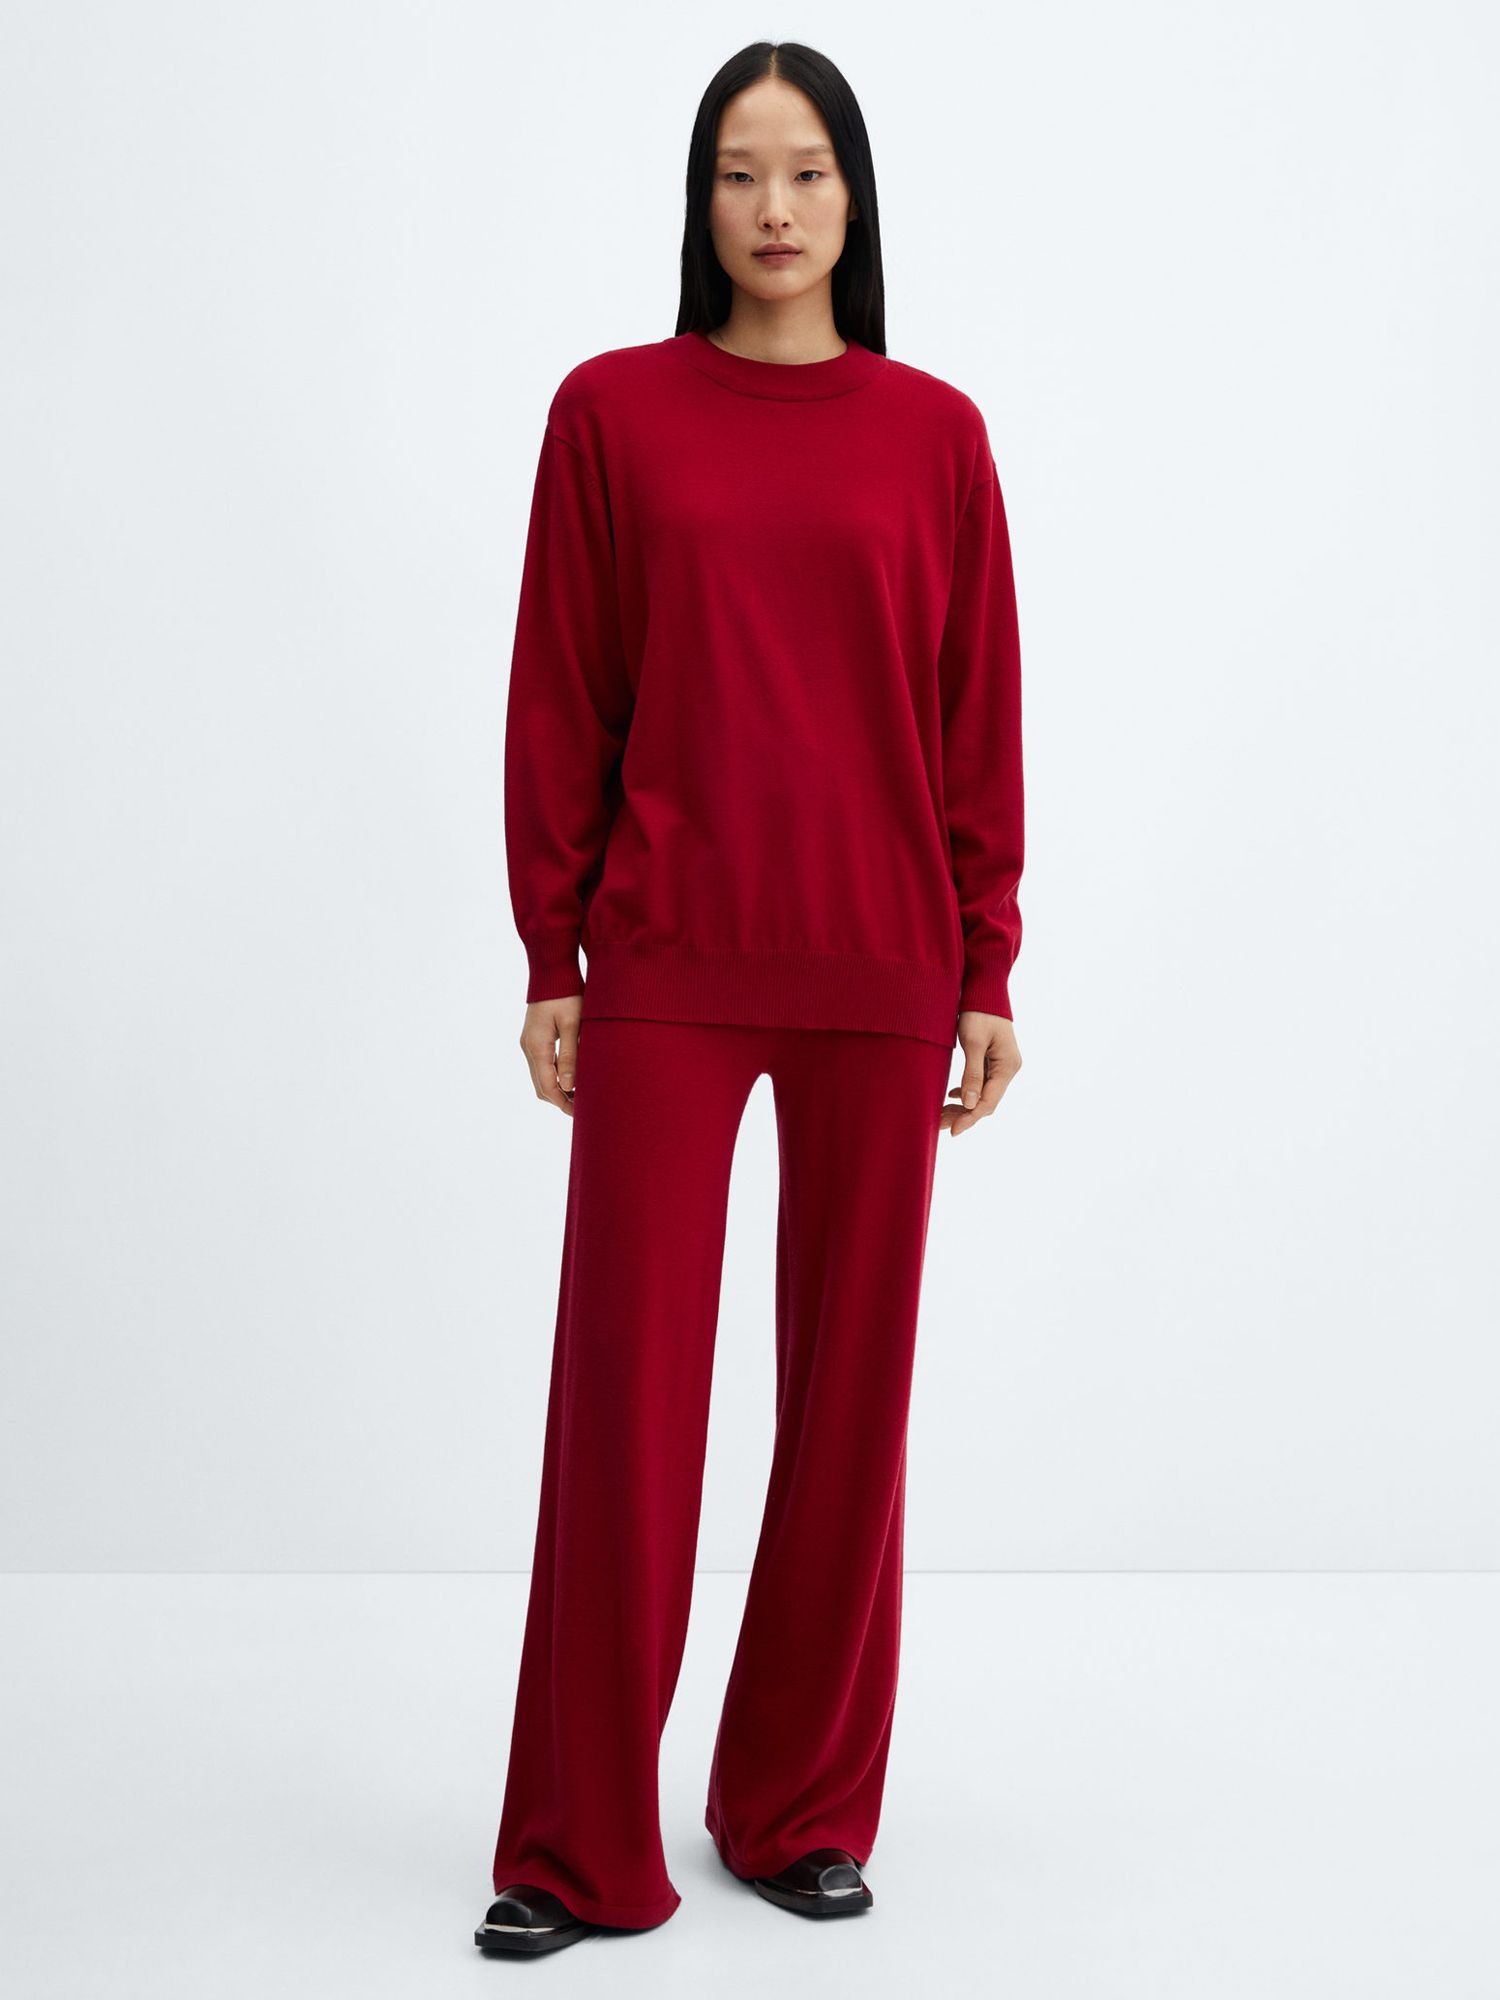 Mango Vieira Knitted Wide Leg Trousers, Red at John Lewis & Partners